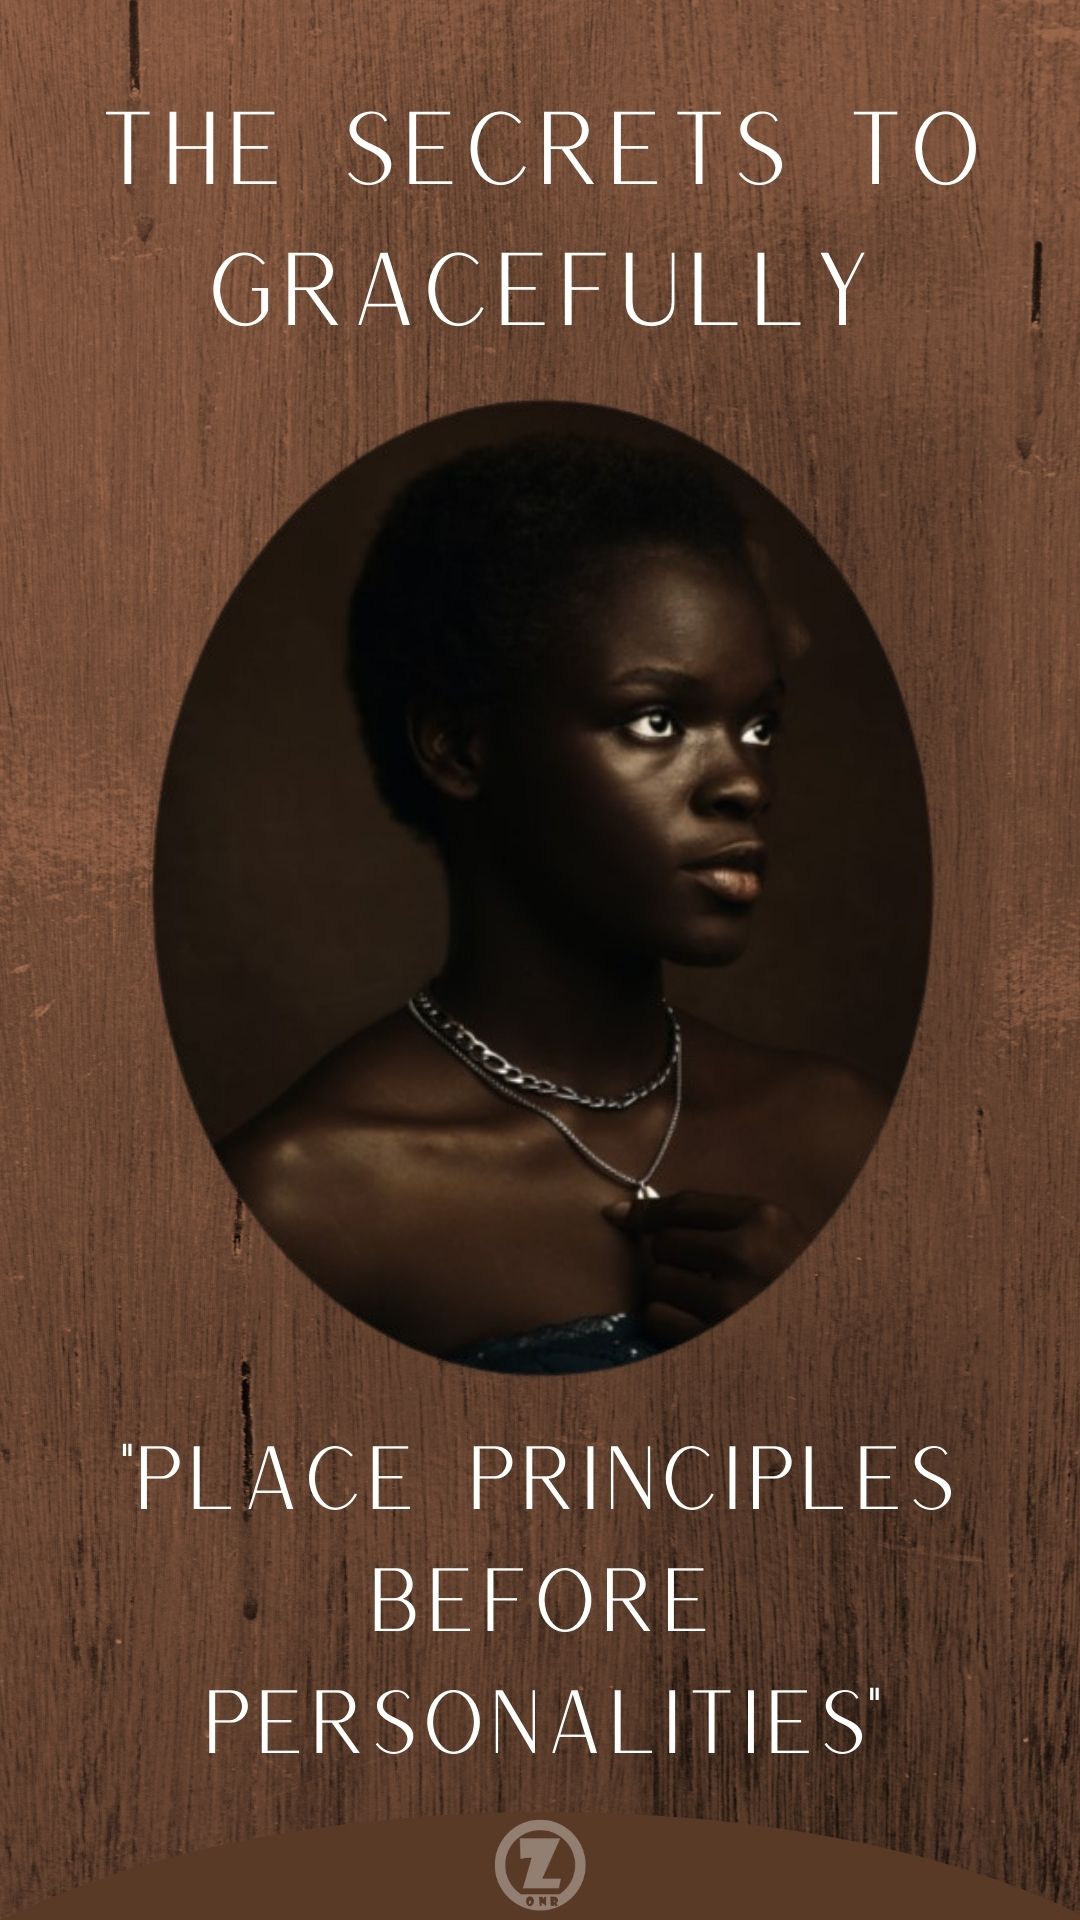 You are currently viewing The Secrets to Gracefully “Place Principles Before Personalities” – Trad. 12